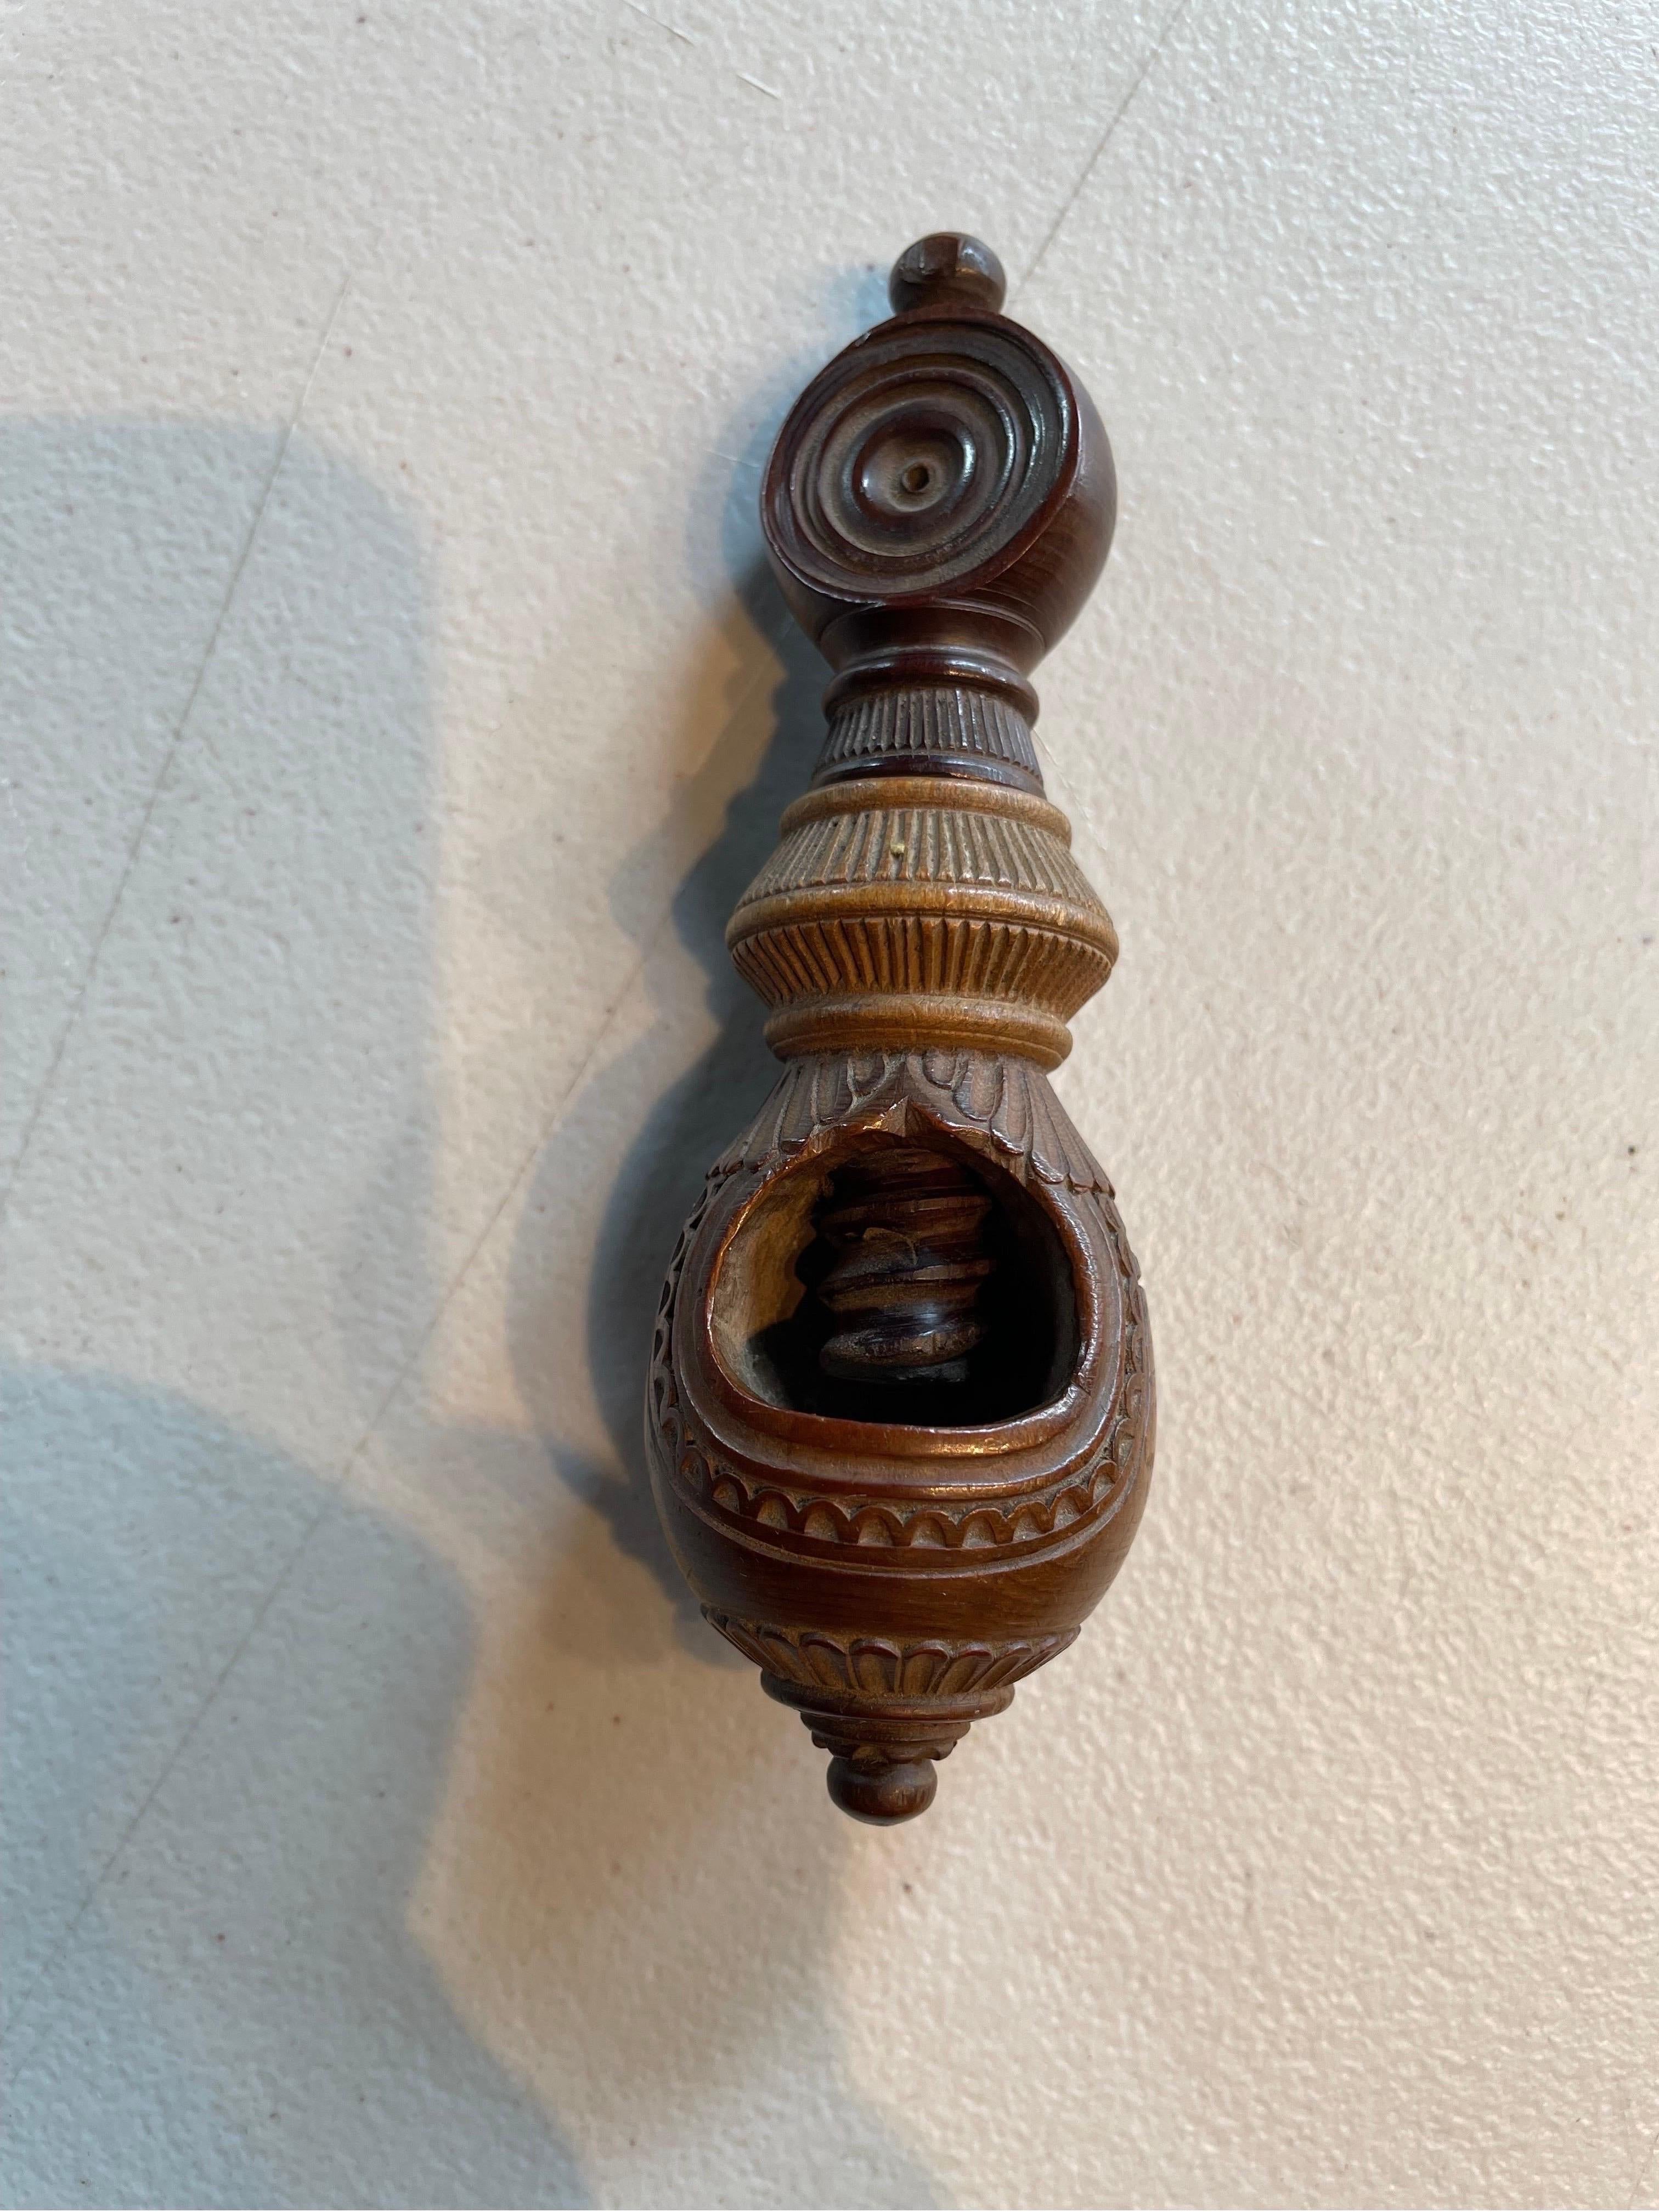 A Wooden Carved Treen Nutcracker, 19th Century

Dimension: Height: 12 cm Diameter: 4 cm.

Provenance: Private Australian Collection.